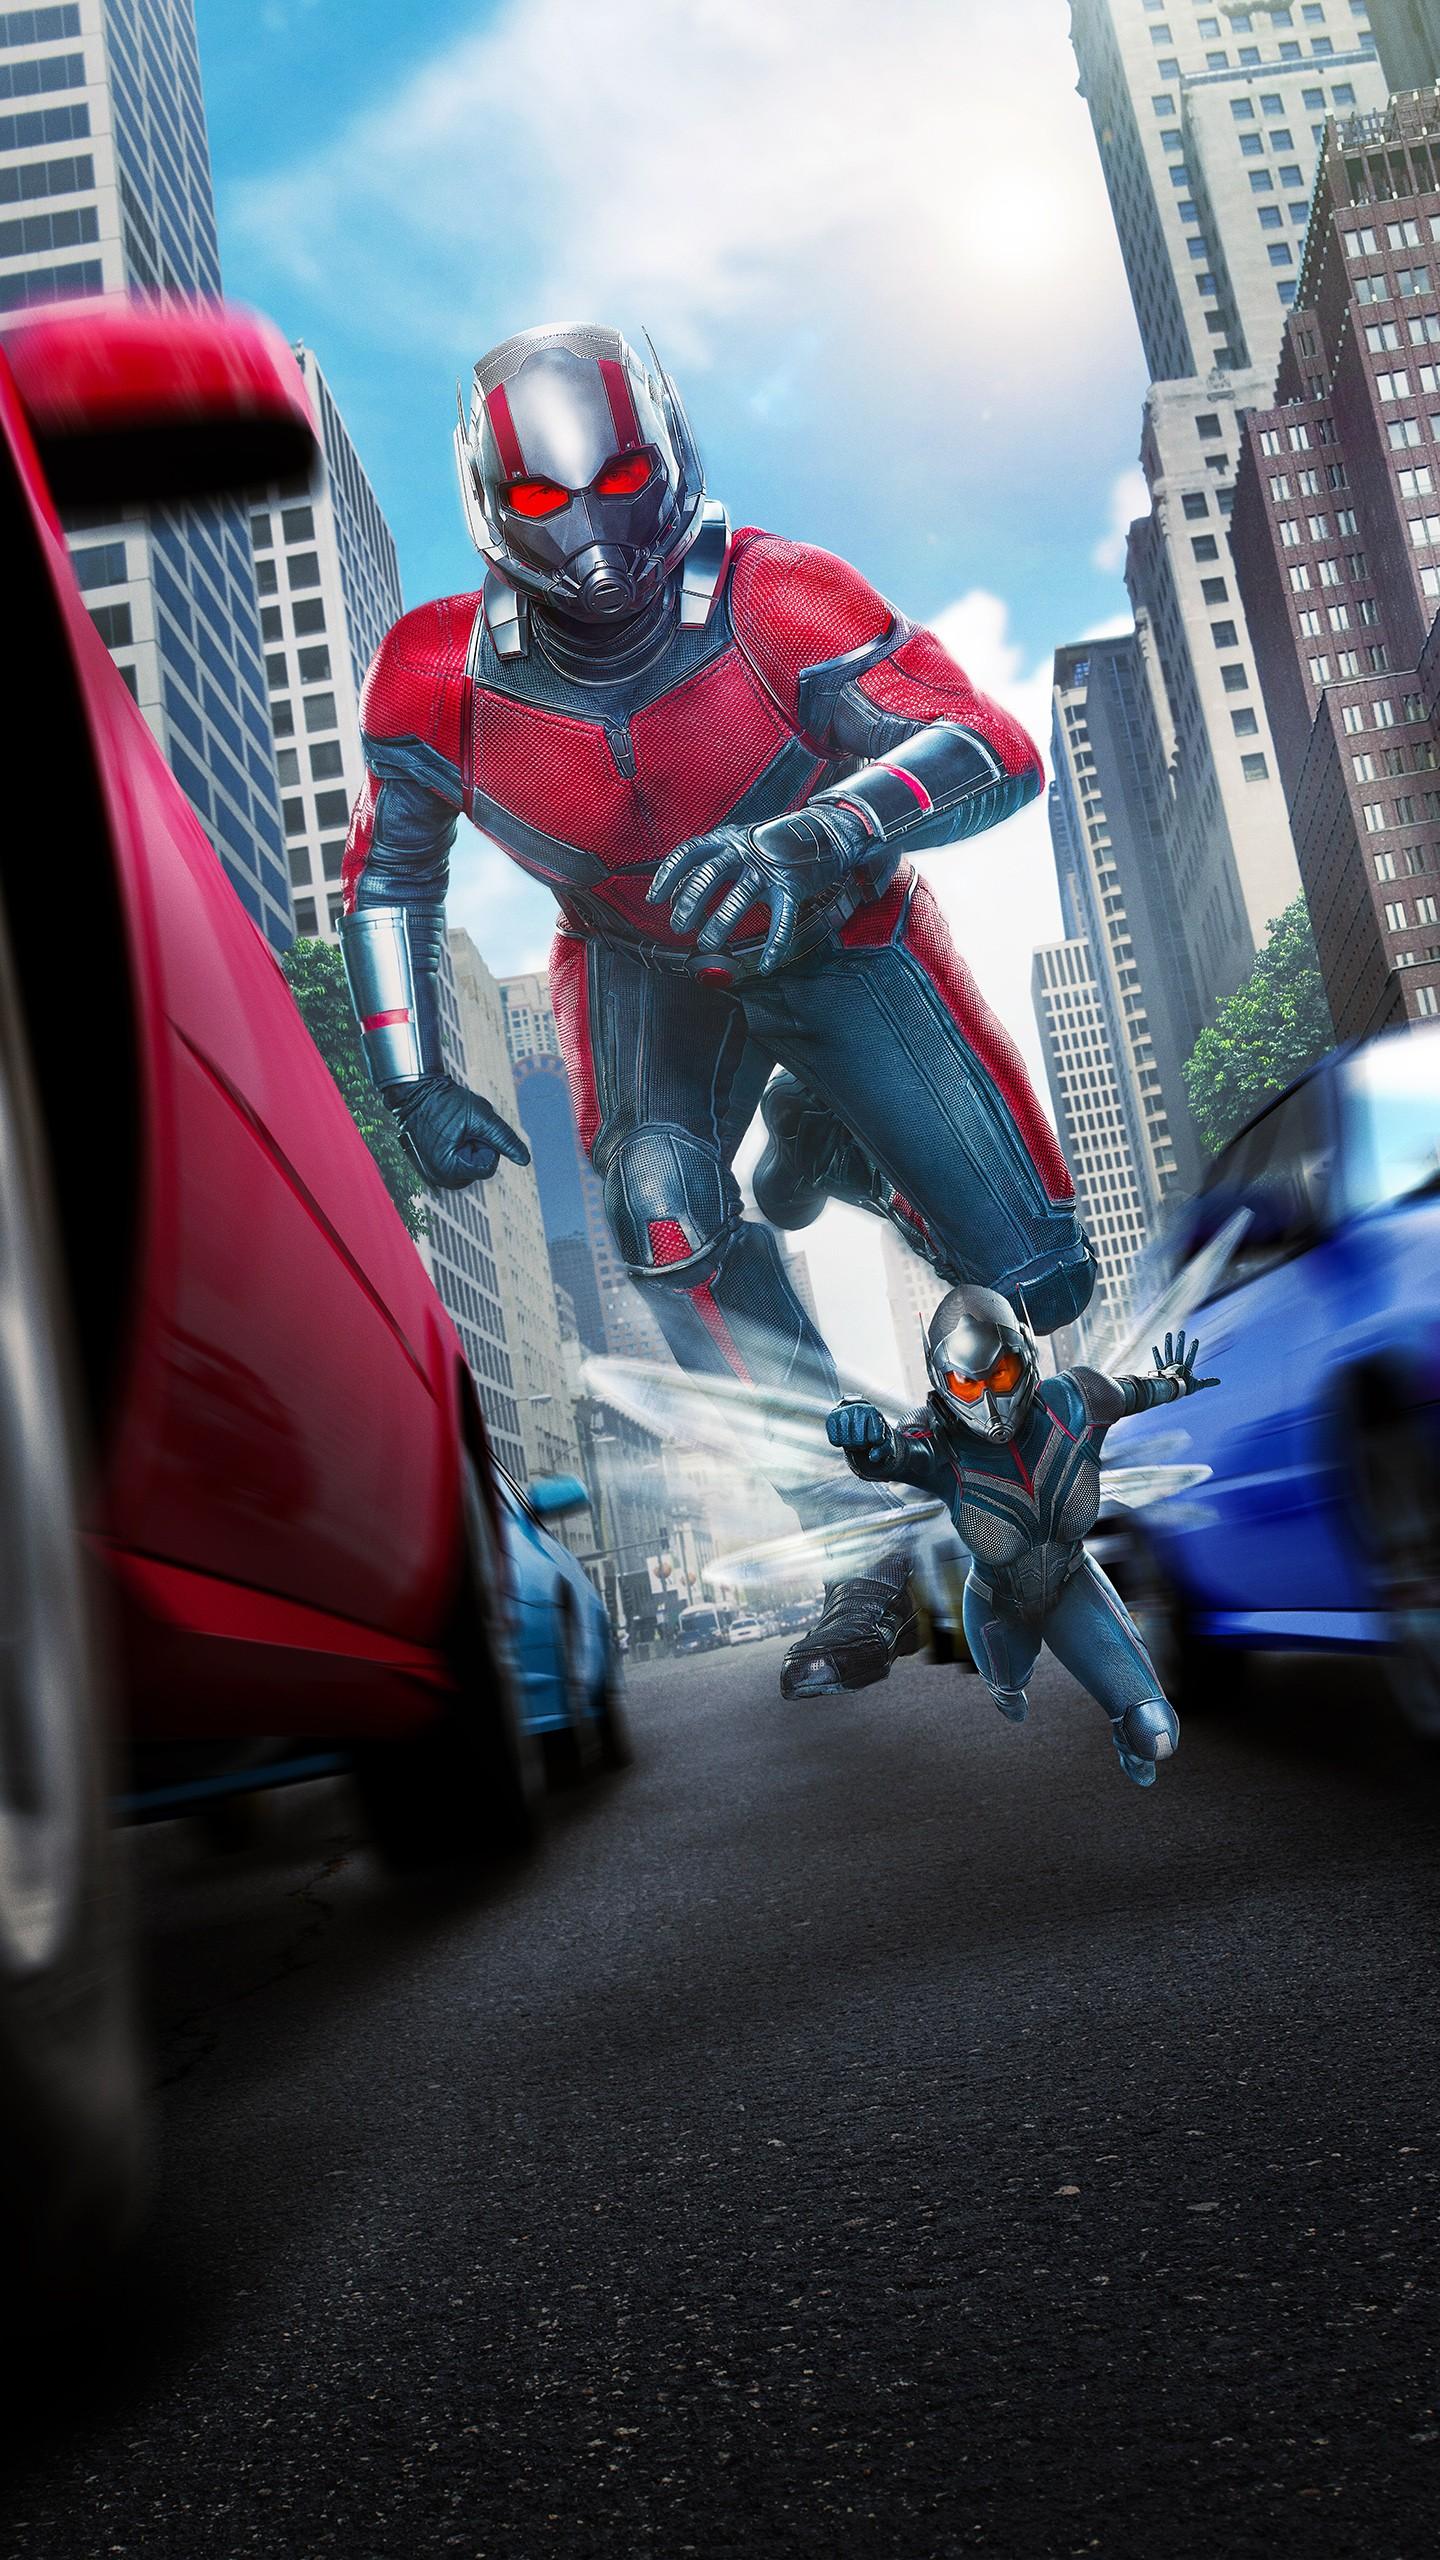 Ant Man Iphone Wallpapers Top Free Ant Man Iphone Backgrounds Wallpaperaccess